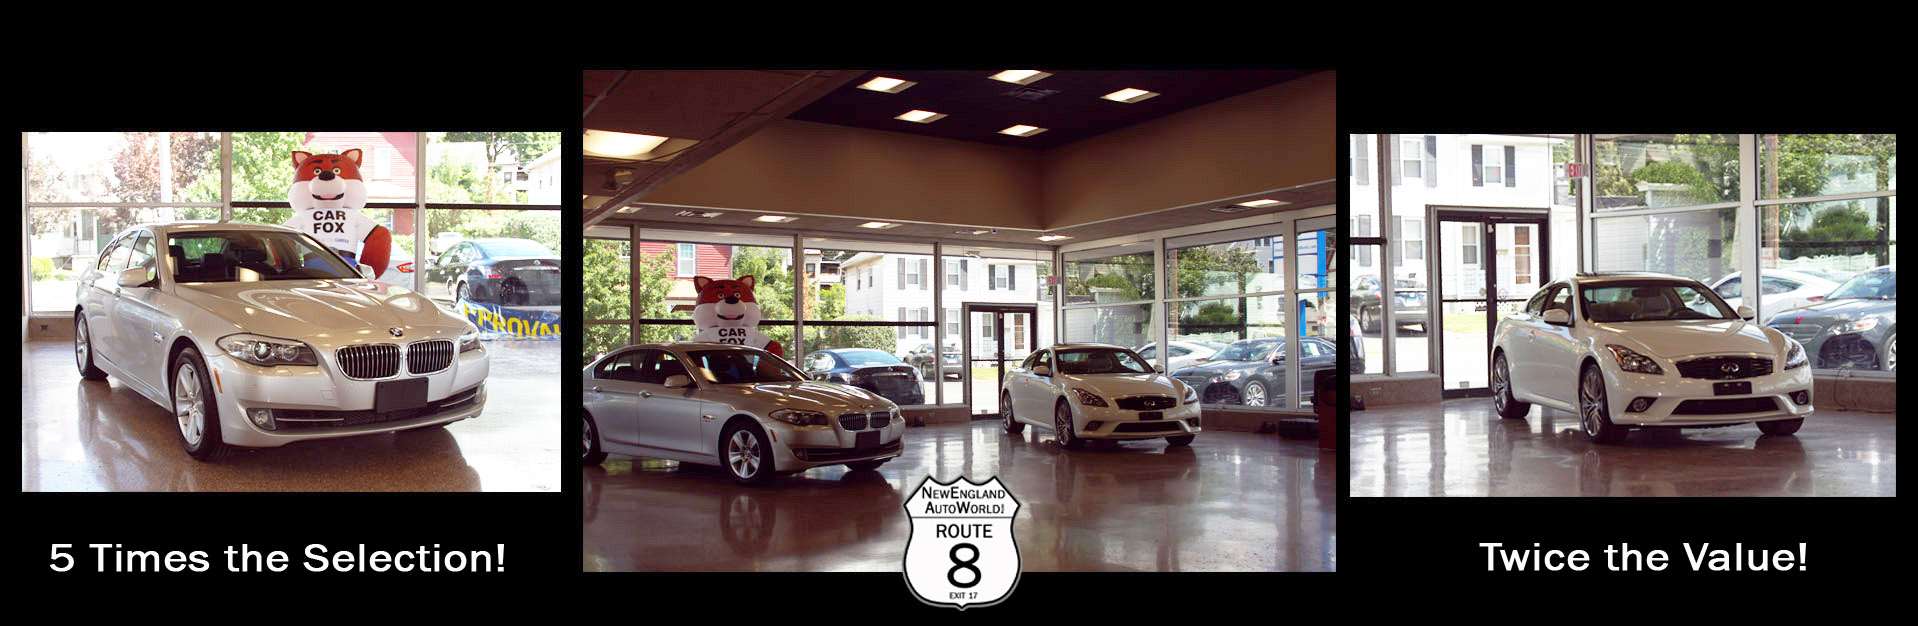 New England Auto World 5 times the Selection, Twice the Value!